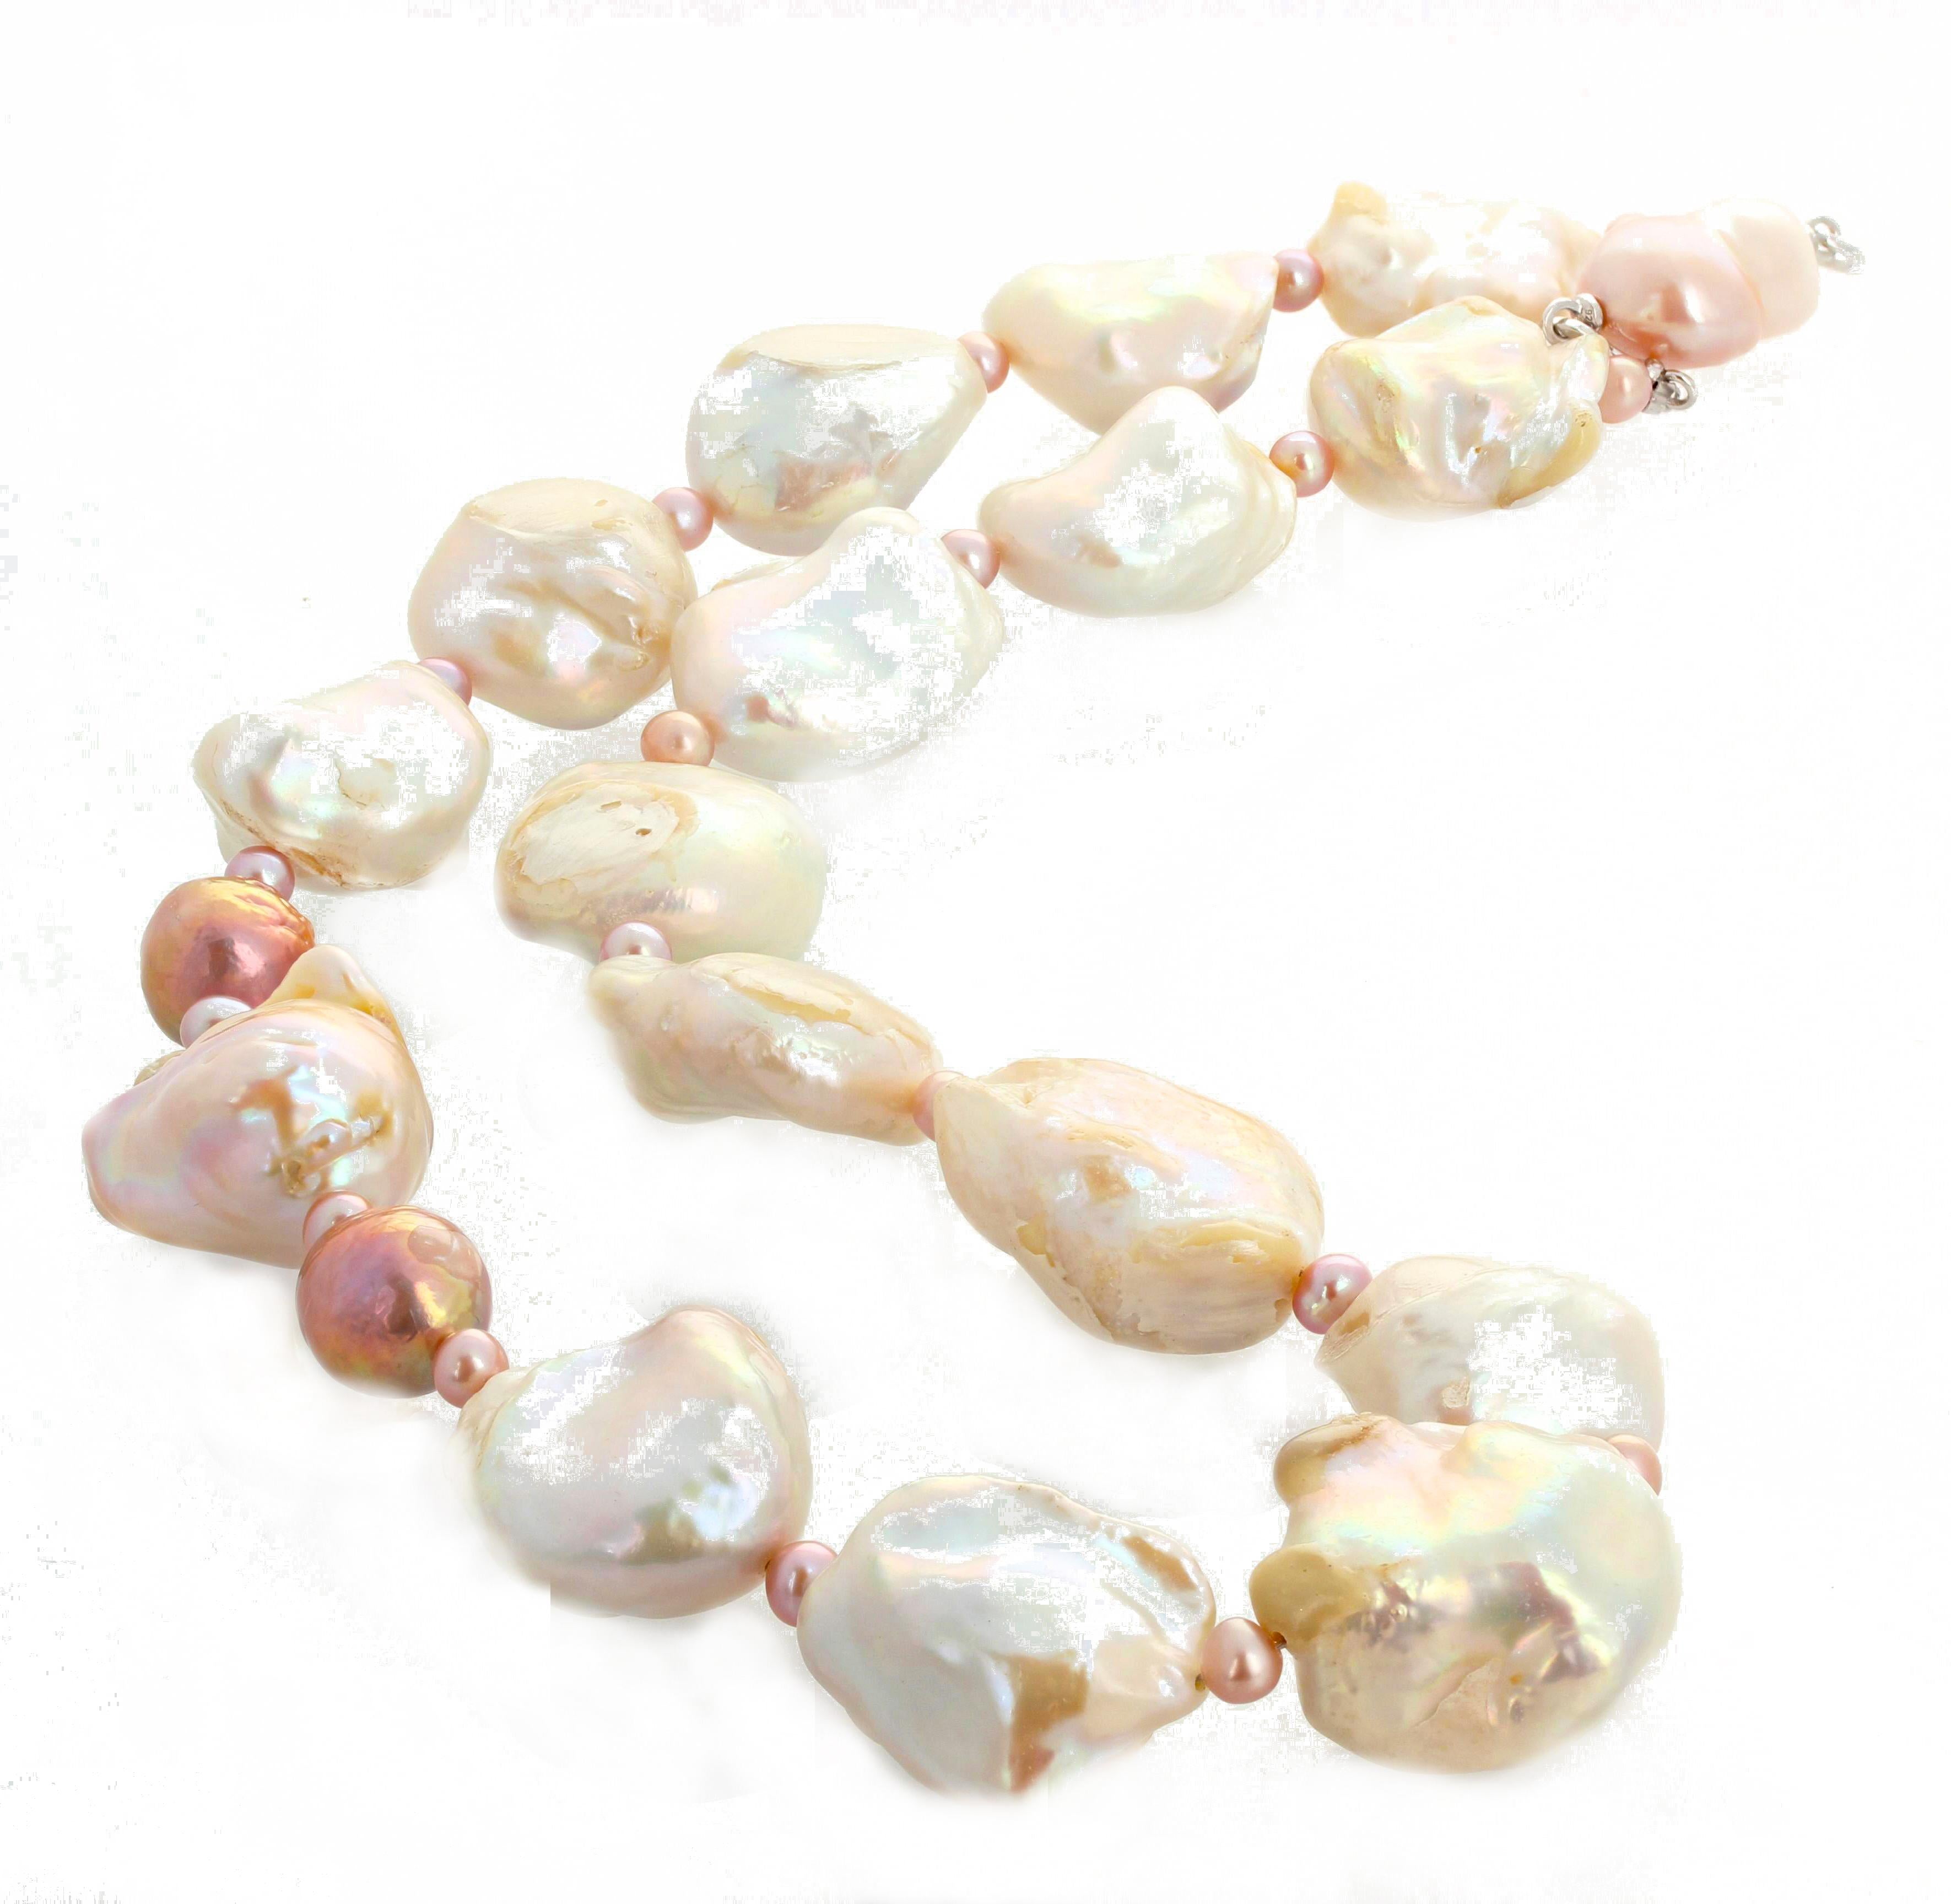 glowing pearl necklace